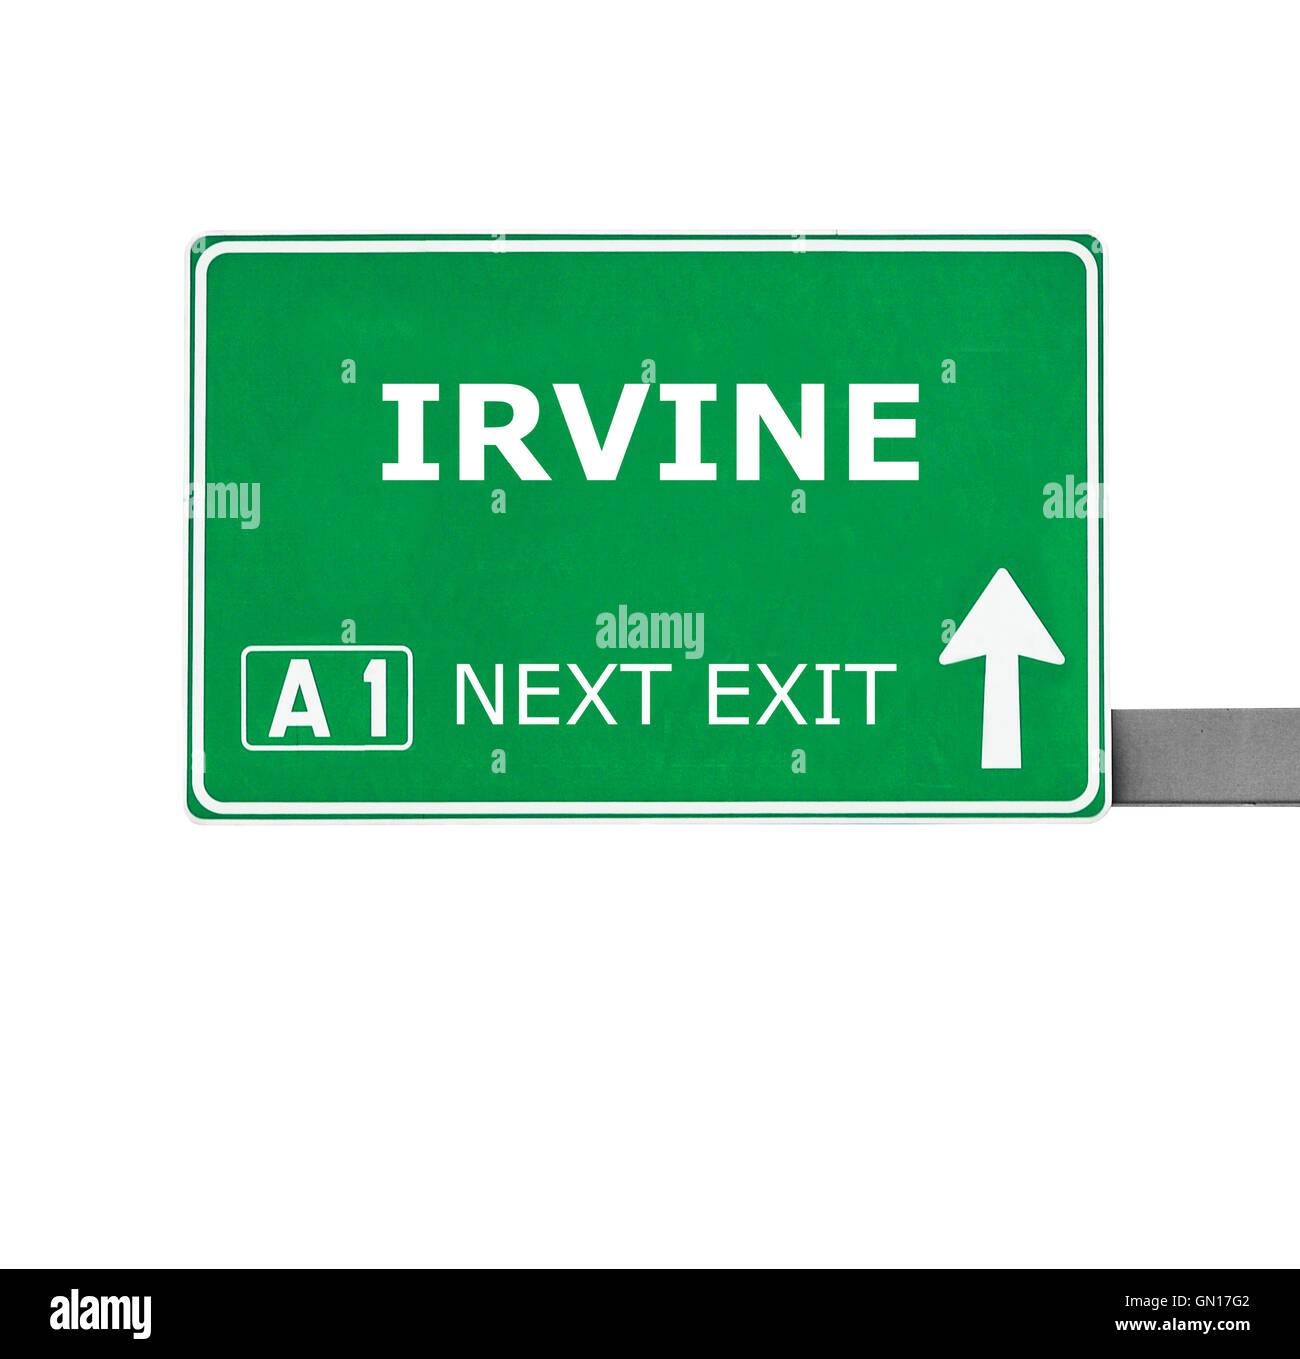 IRVINE road sign isolated on white Banque D'Images